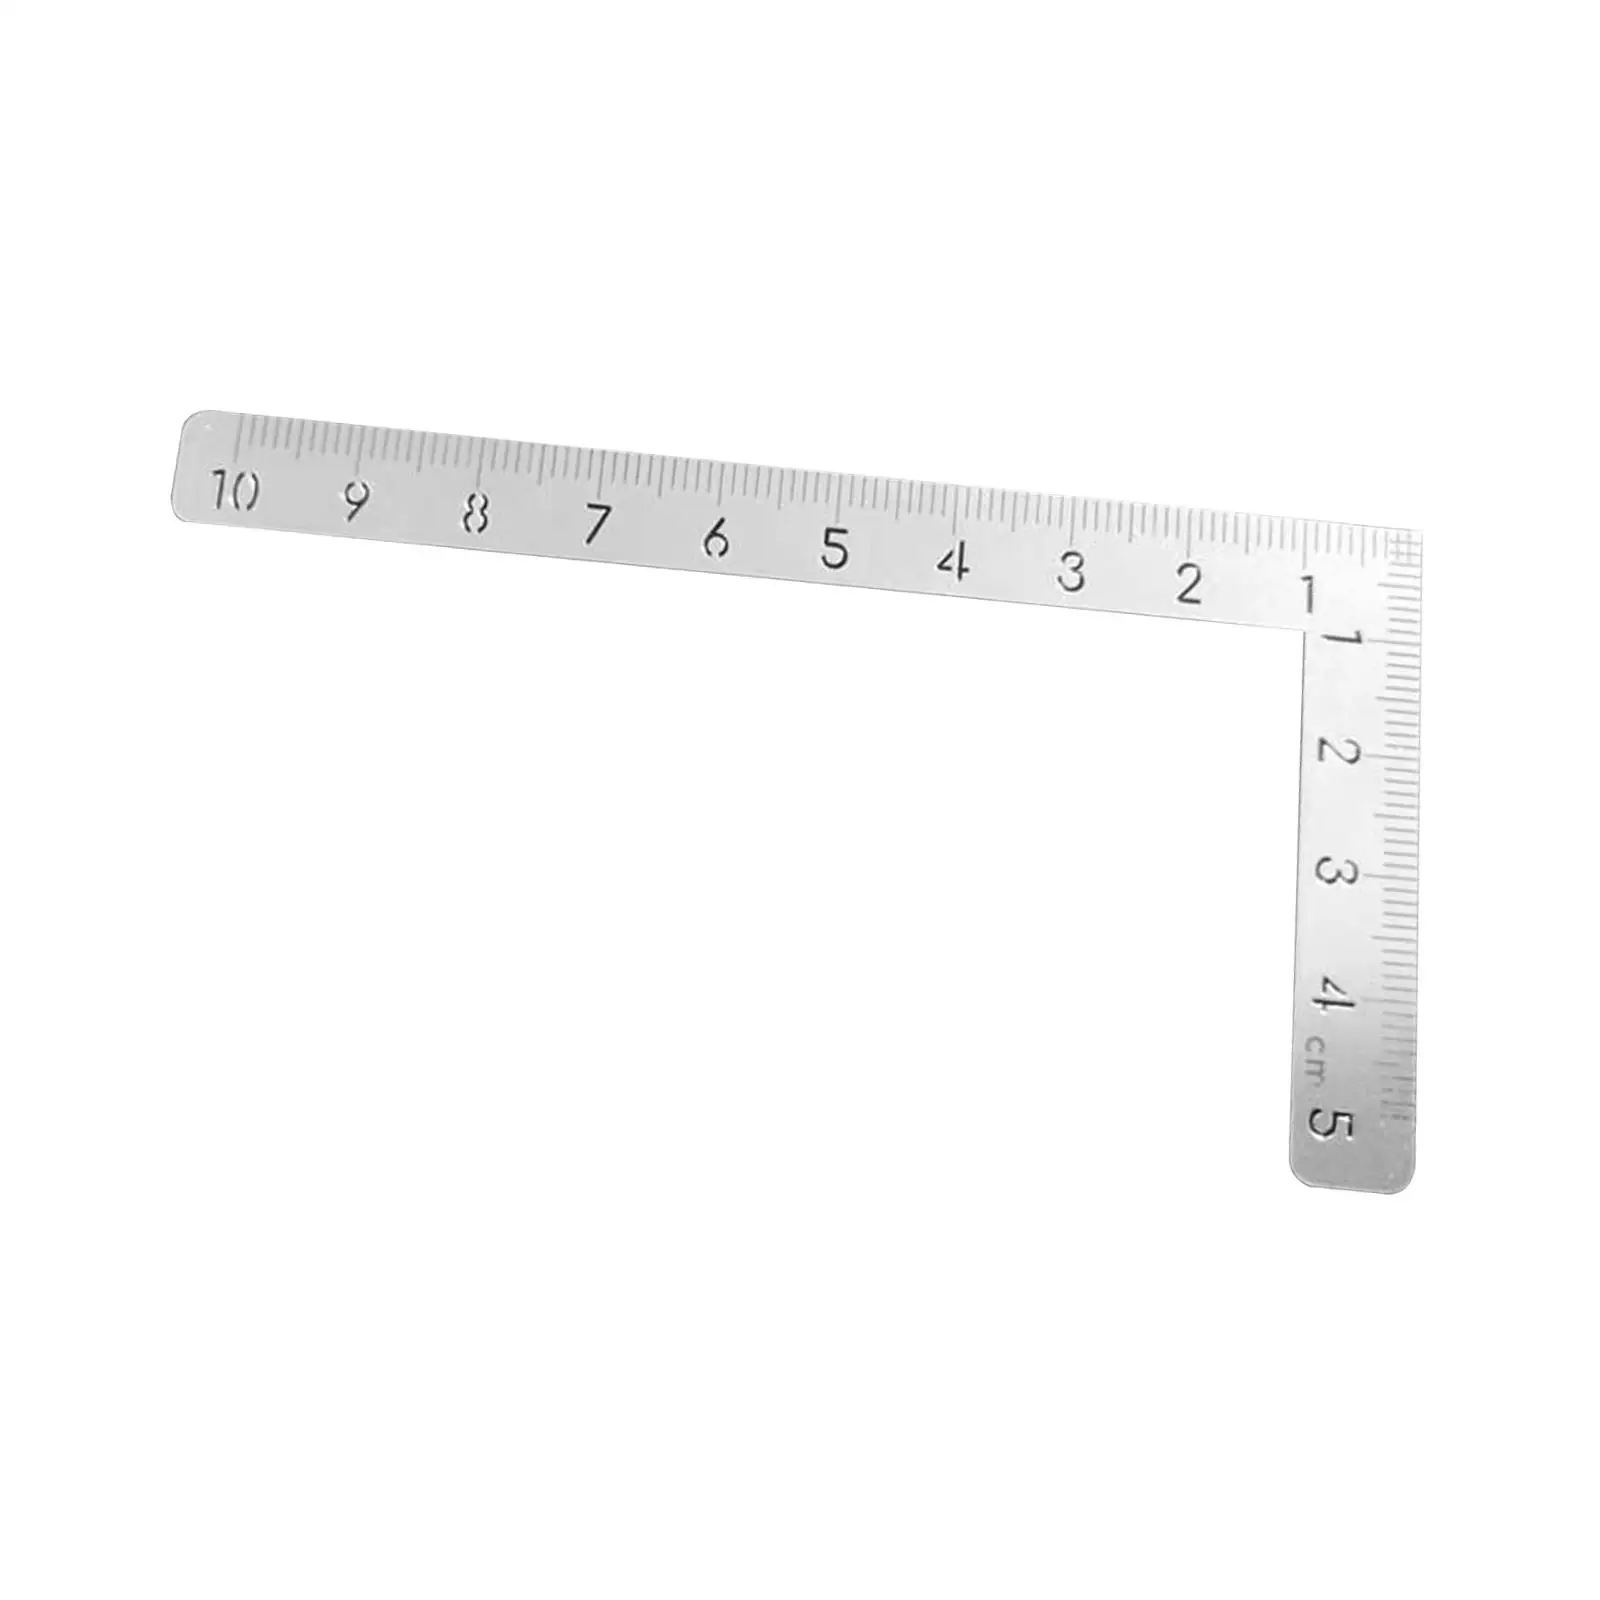 Leather Craft Ruler Precise Angle Stainless Steel Shape Positioning Ruler Measuring for Model Making Tools Art Framing Engineer